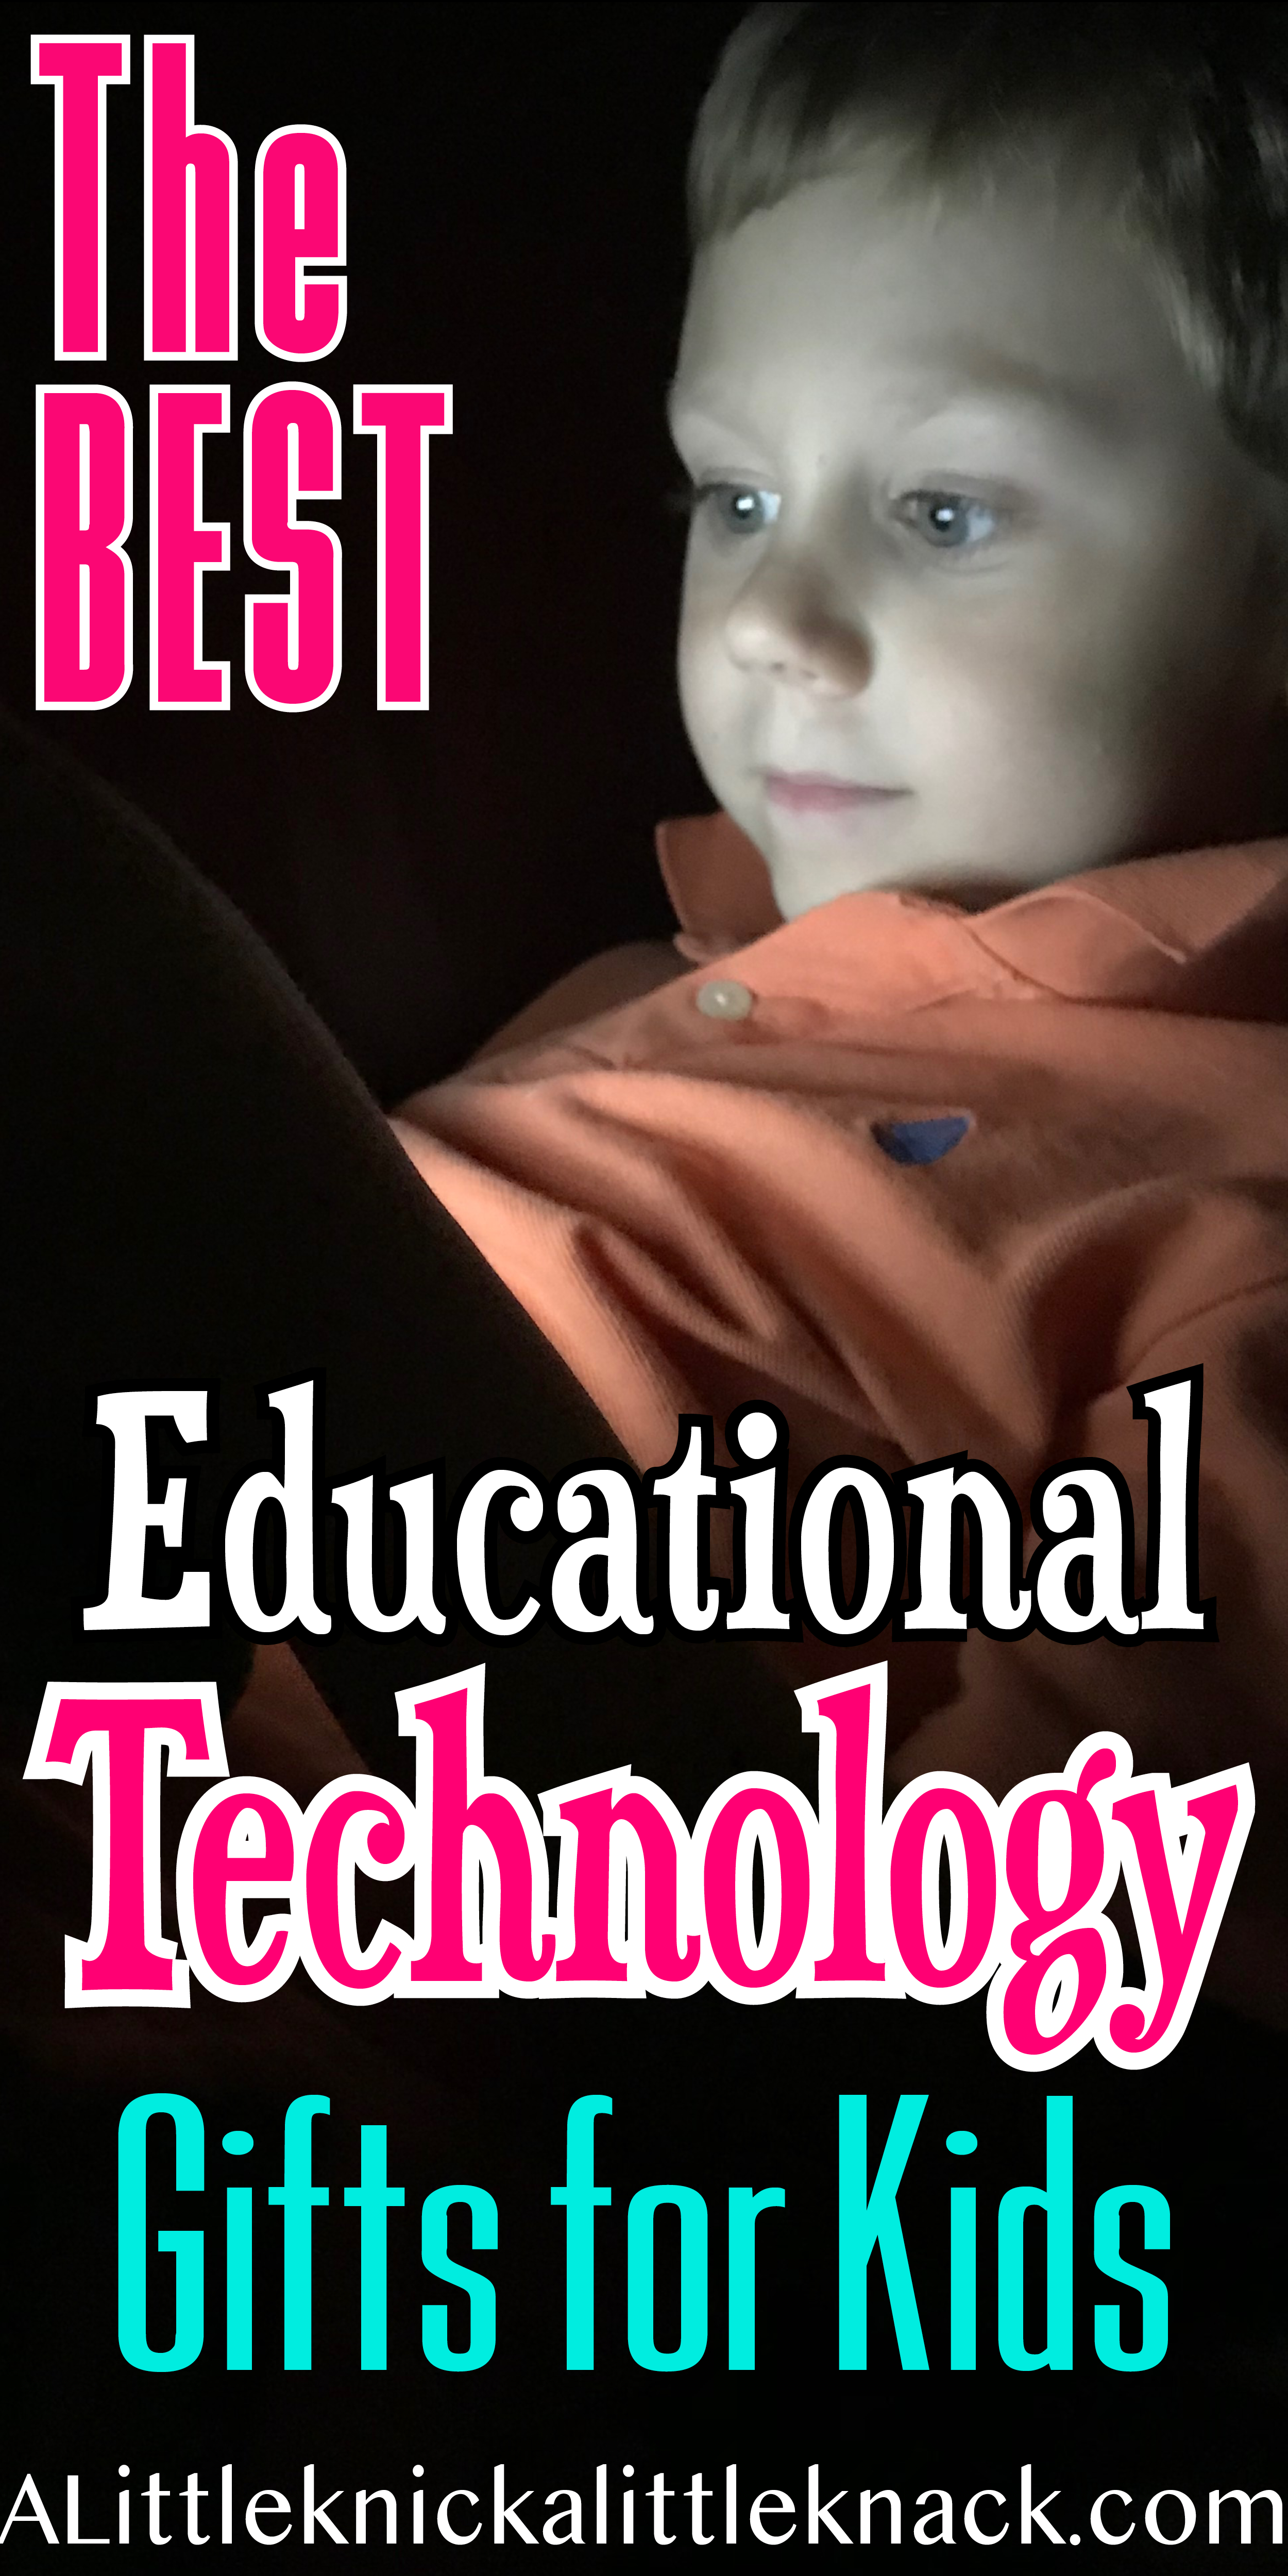 looking for a techy educational but fun gift for your child? This list has them all! #kidgifts